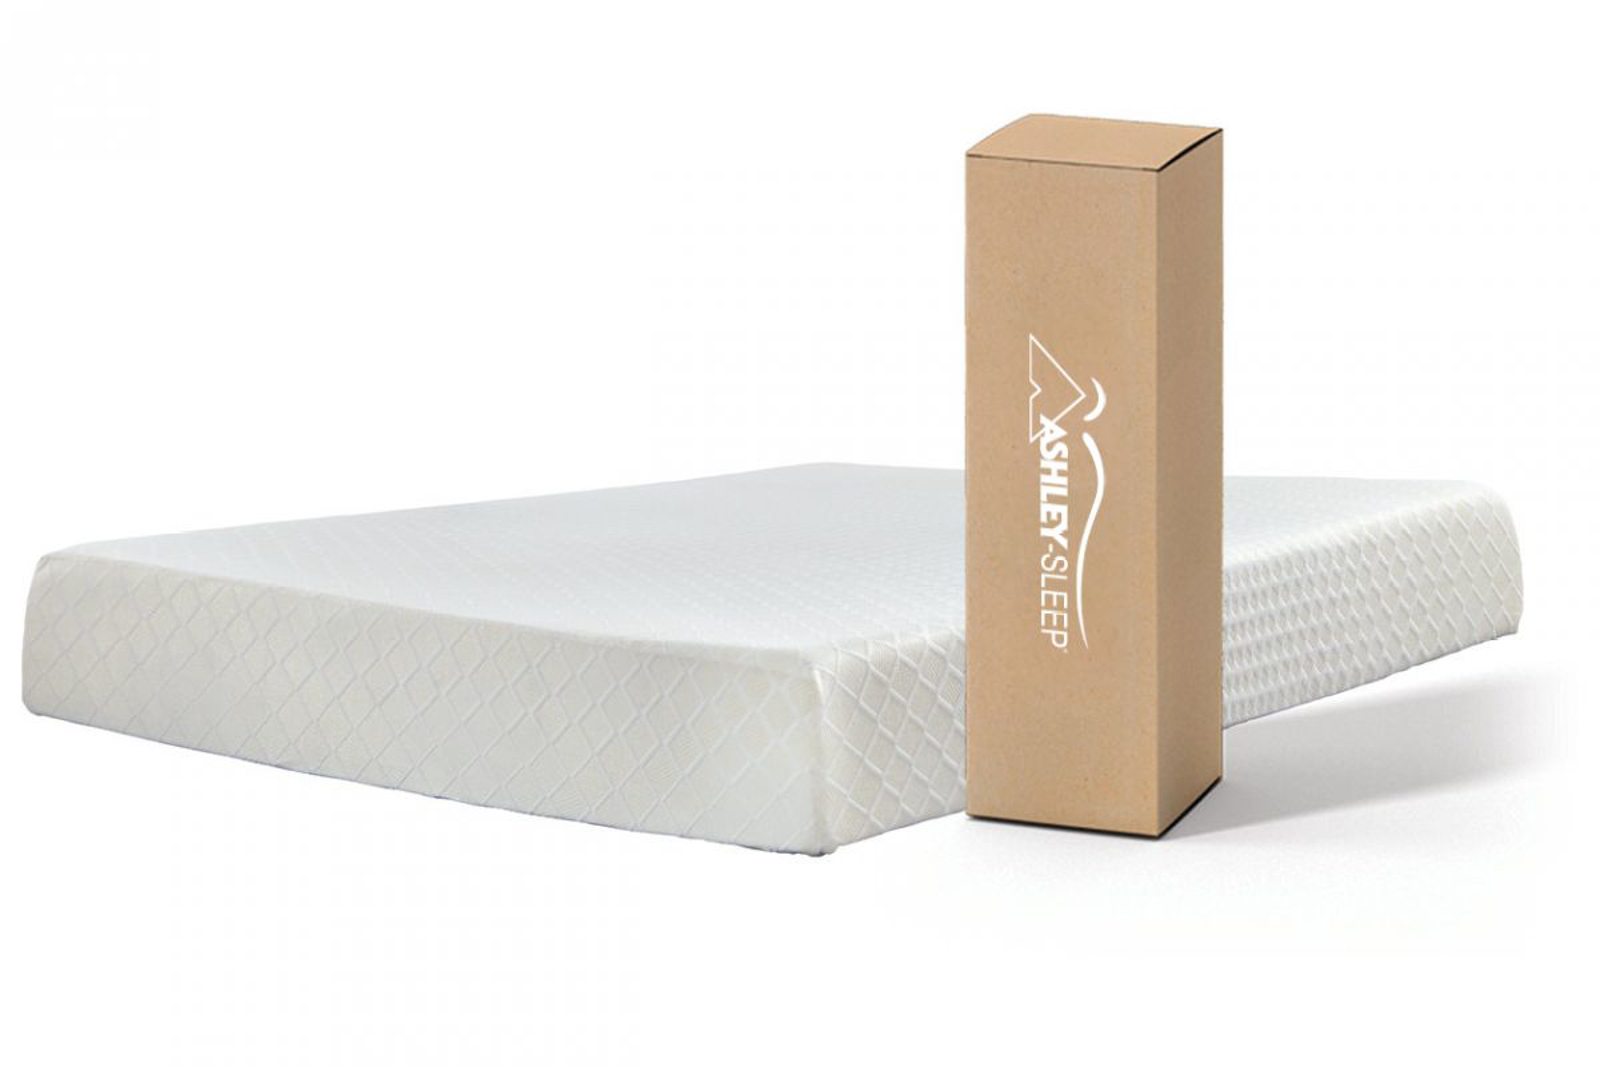 Picture of Chime 10in Memory Foam Mattress